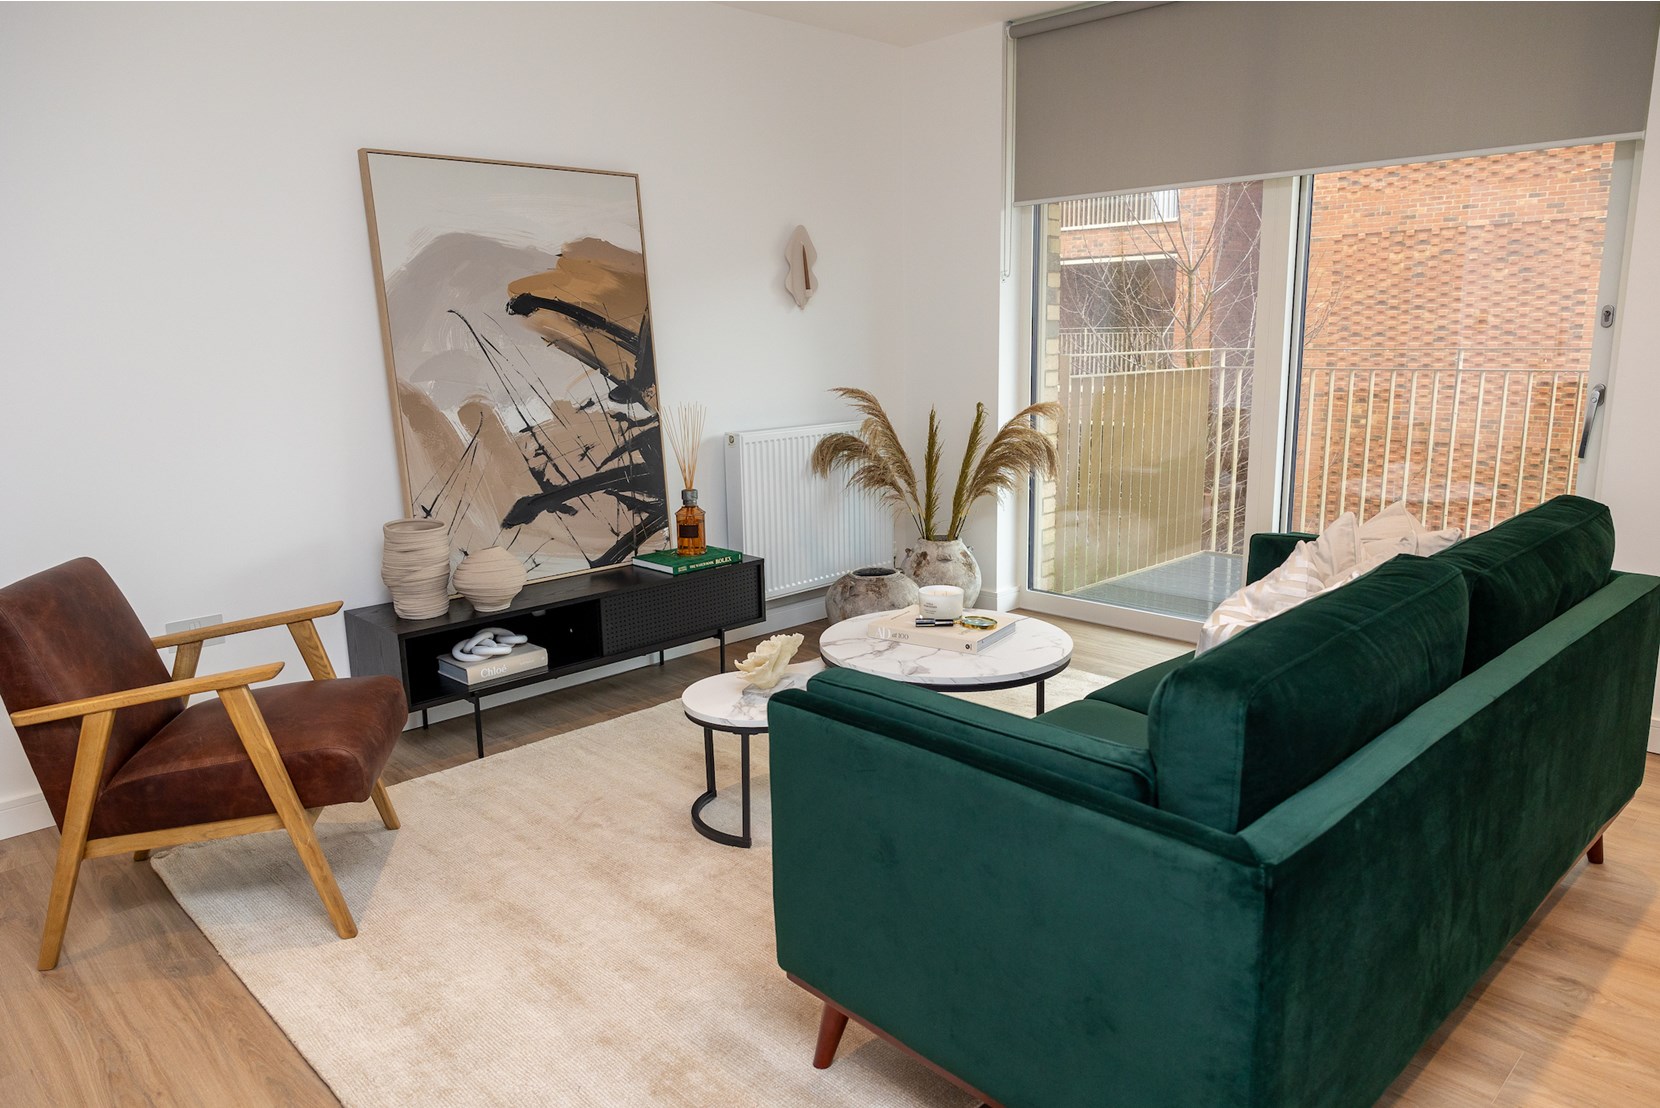 Apartments to Rent by Populo Living at The Brickyard, Newham, E6, living area